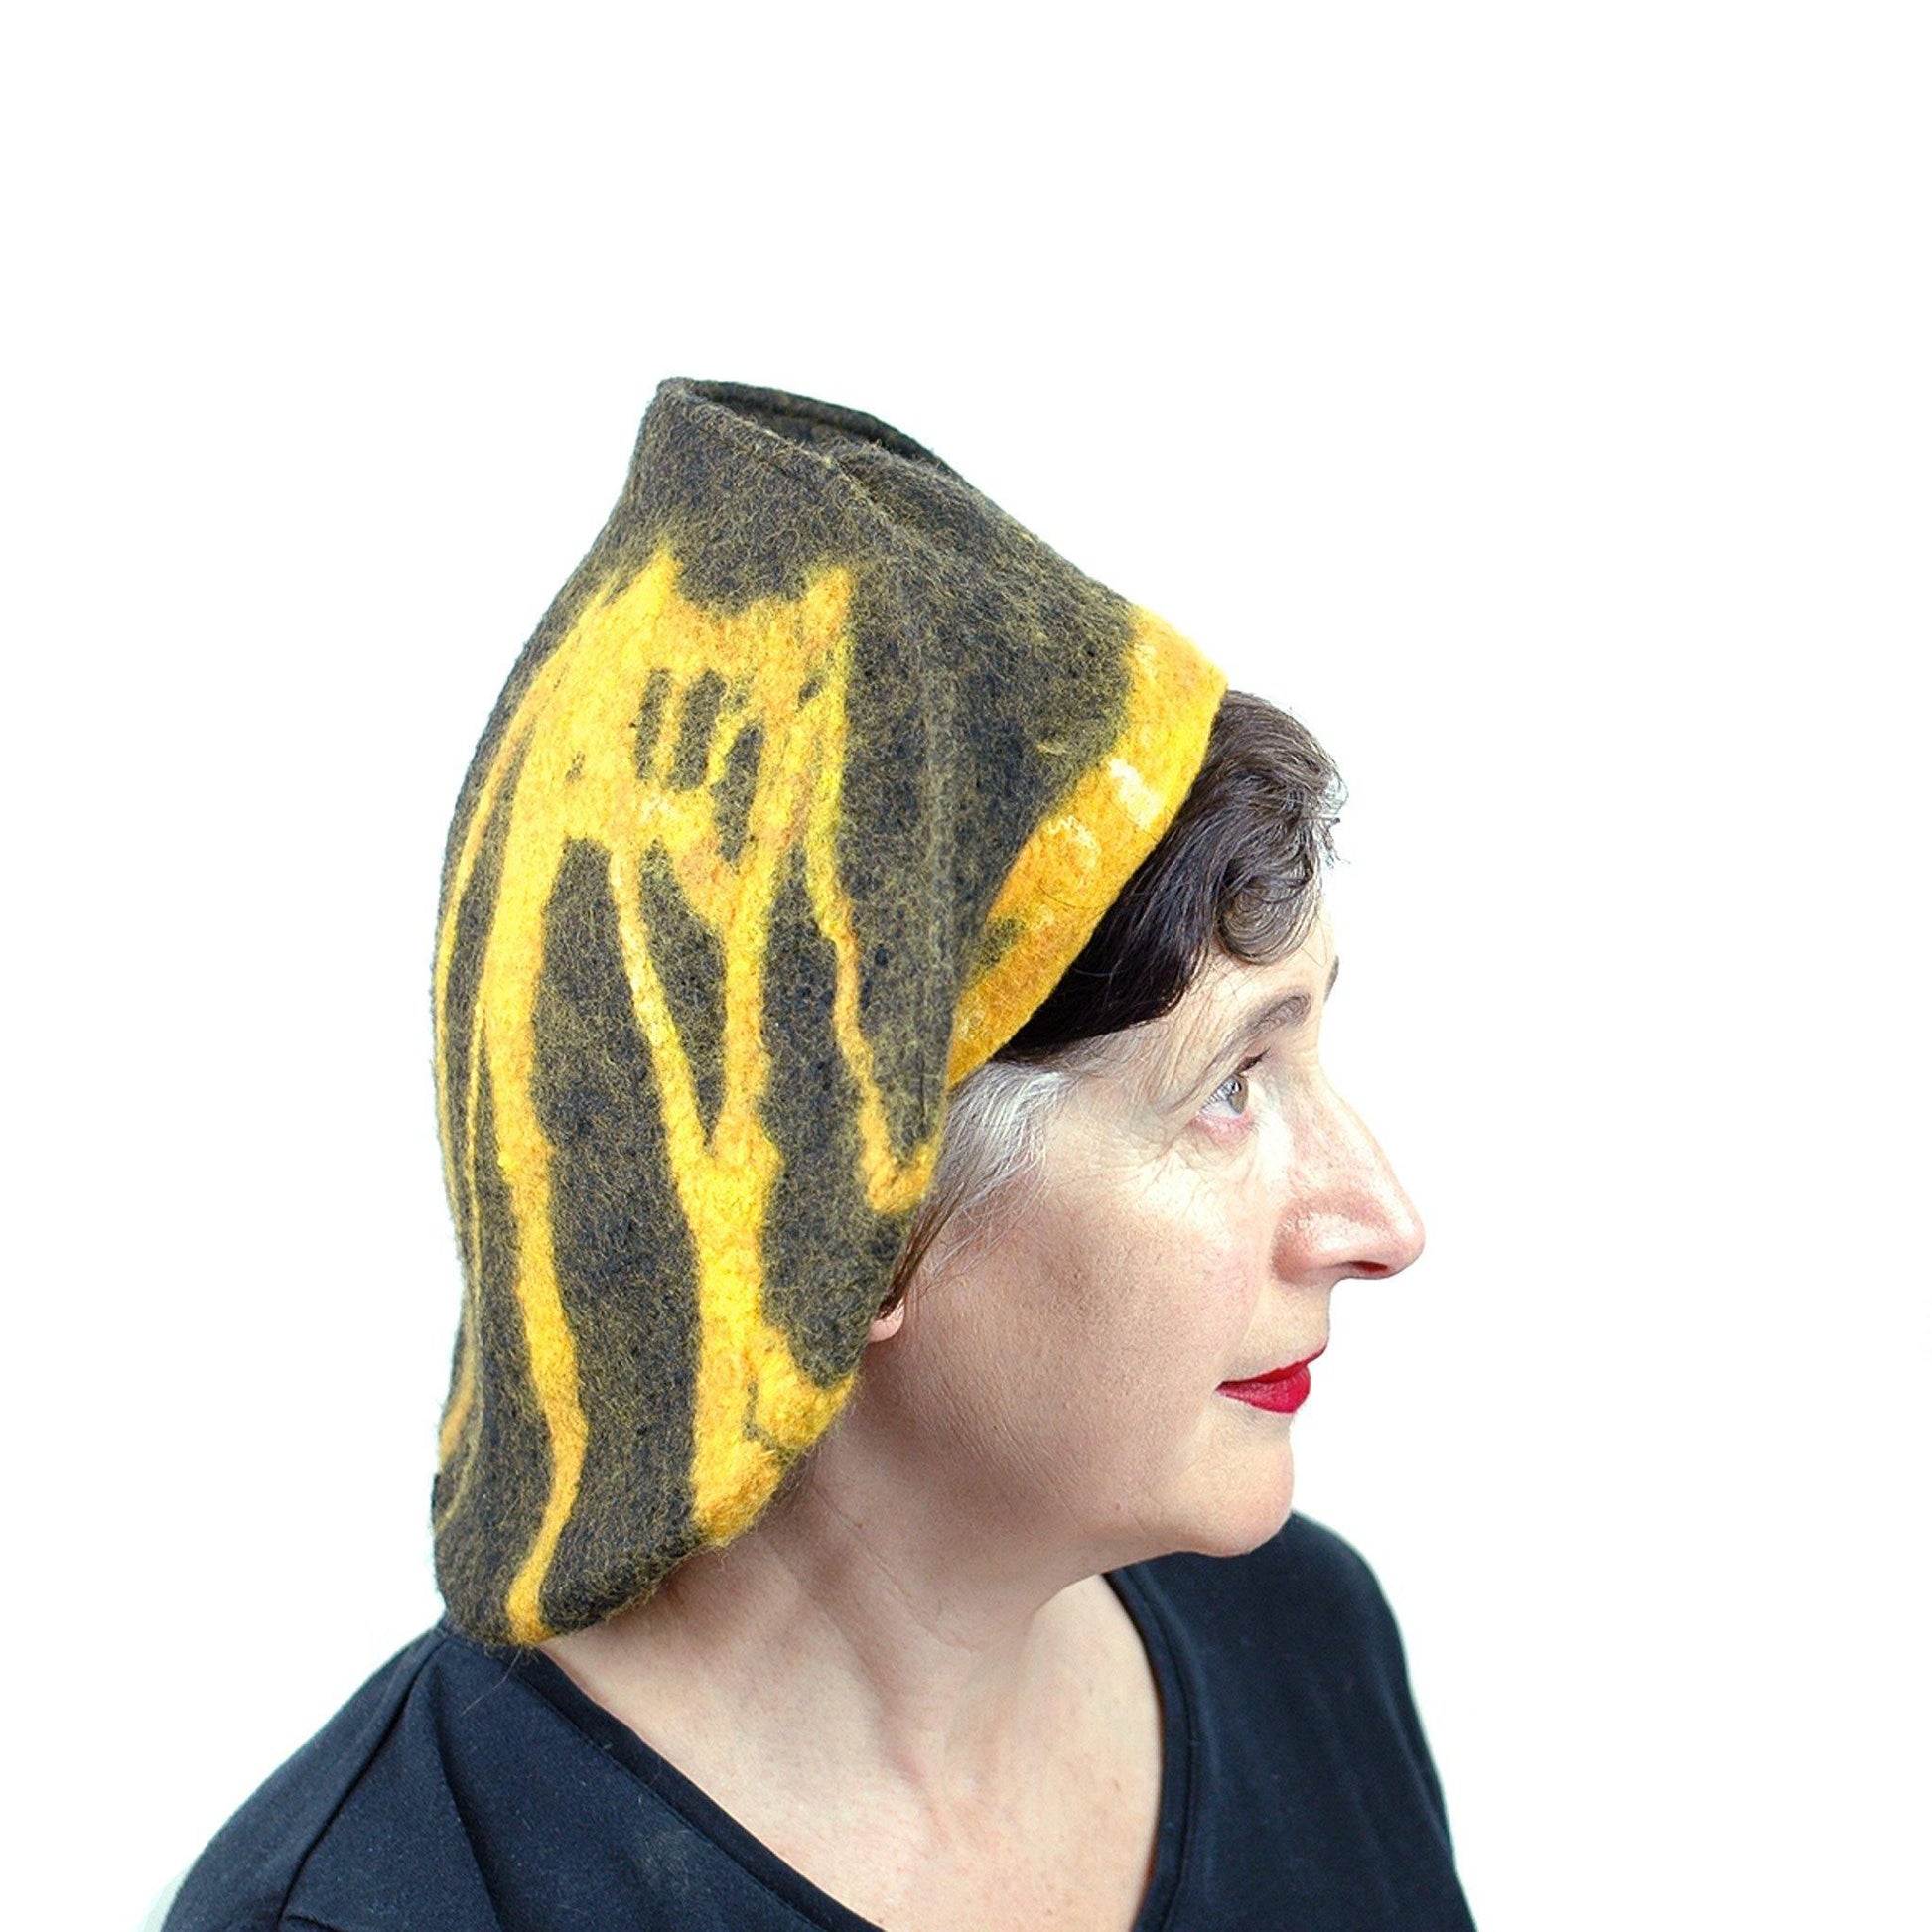 Black and Gold Beret with Bridge - side view